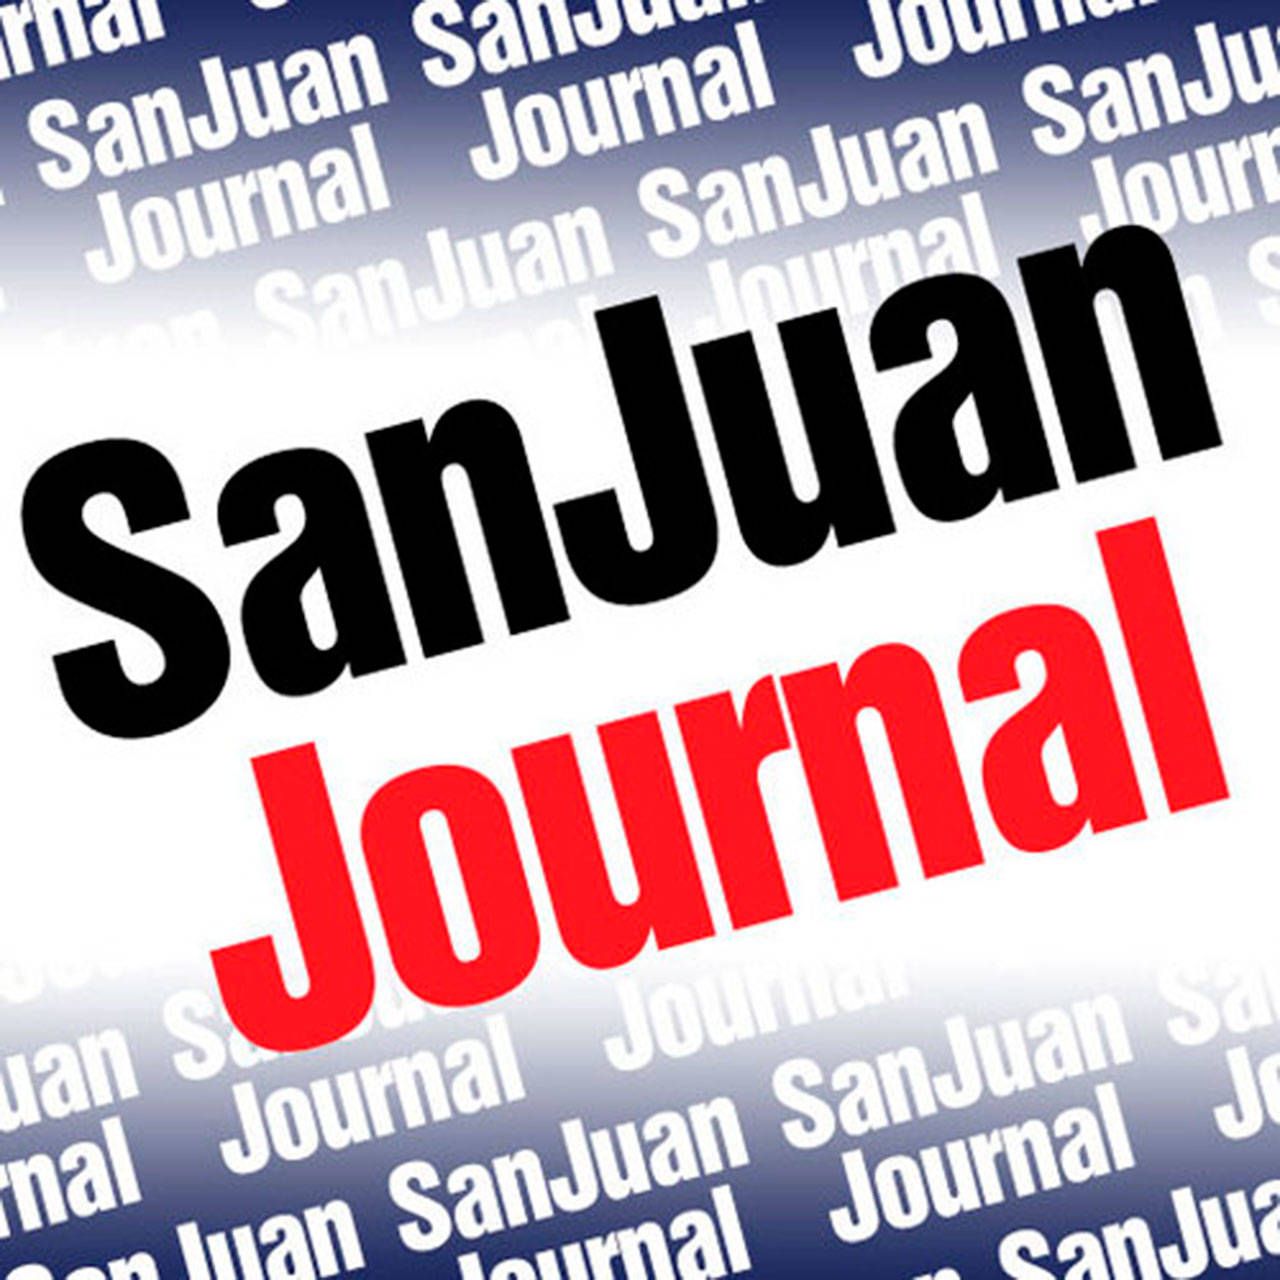 Why the Journal endorses candidates | Editorial